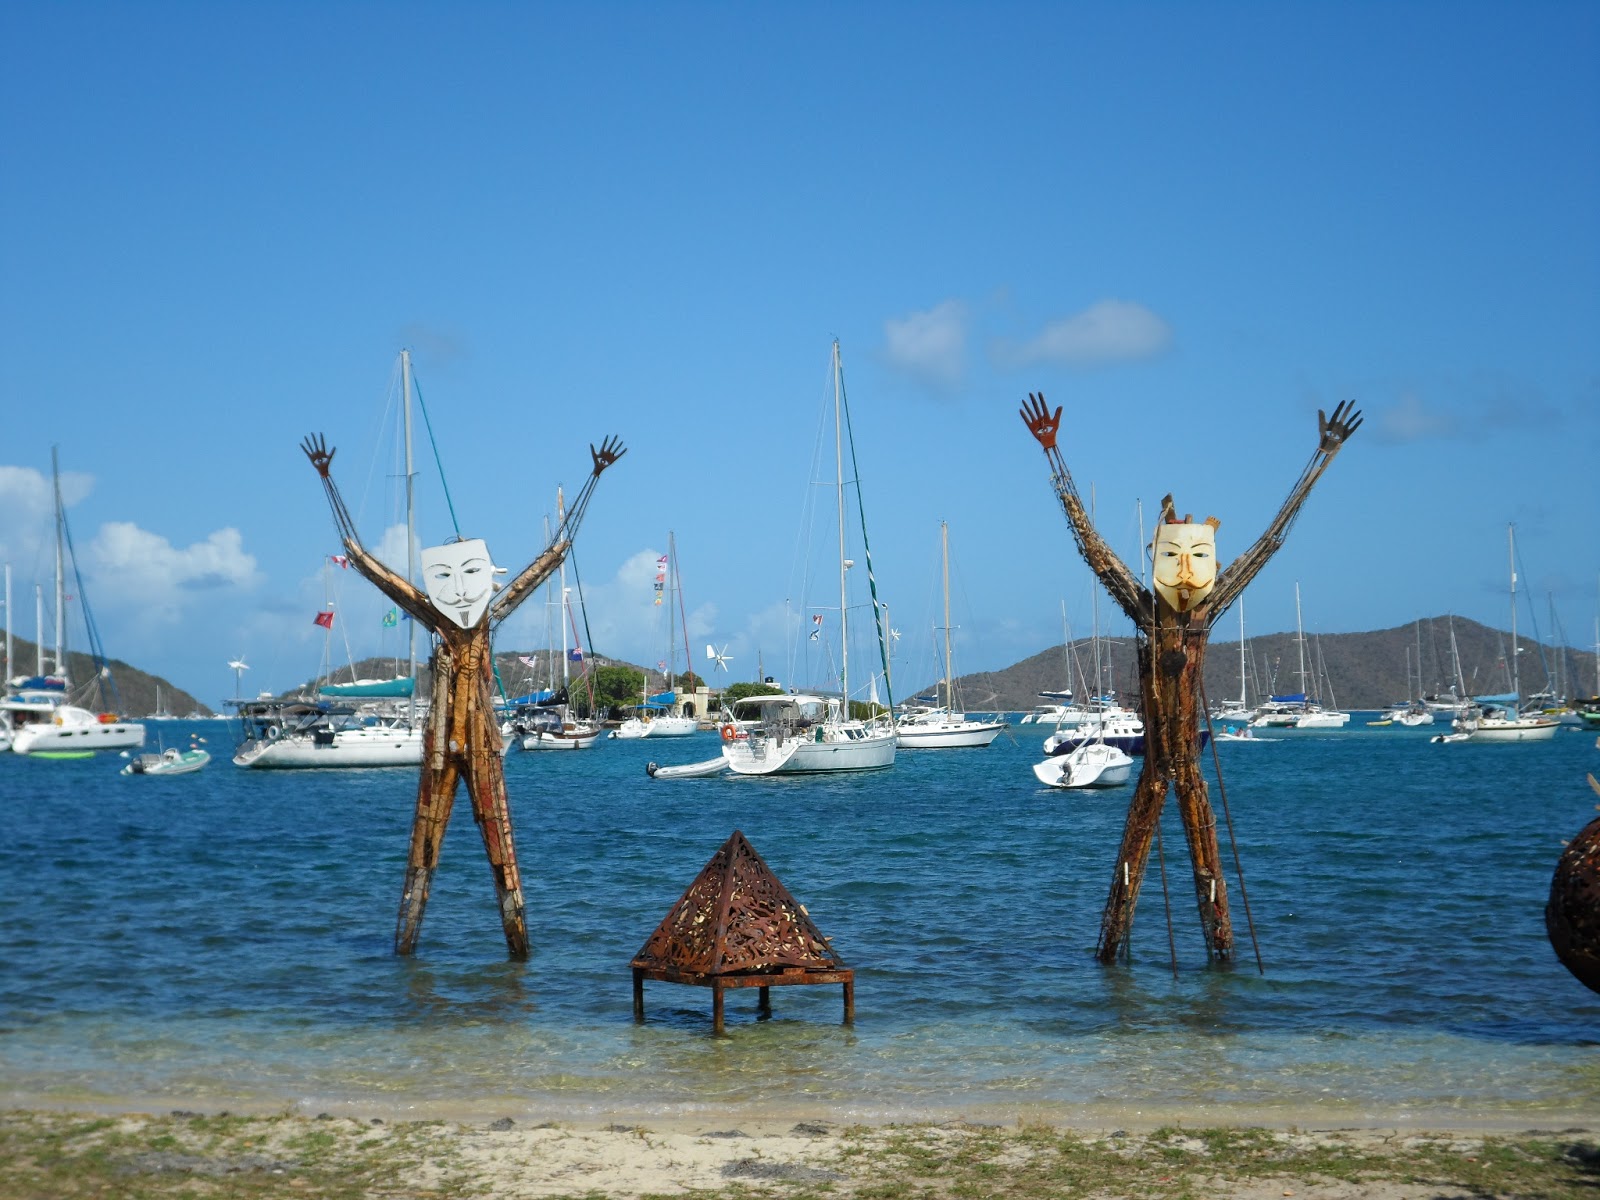 “To travel is to live.” Hans Christian Full moon party Trellis Bay, BVI